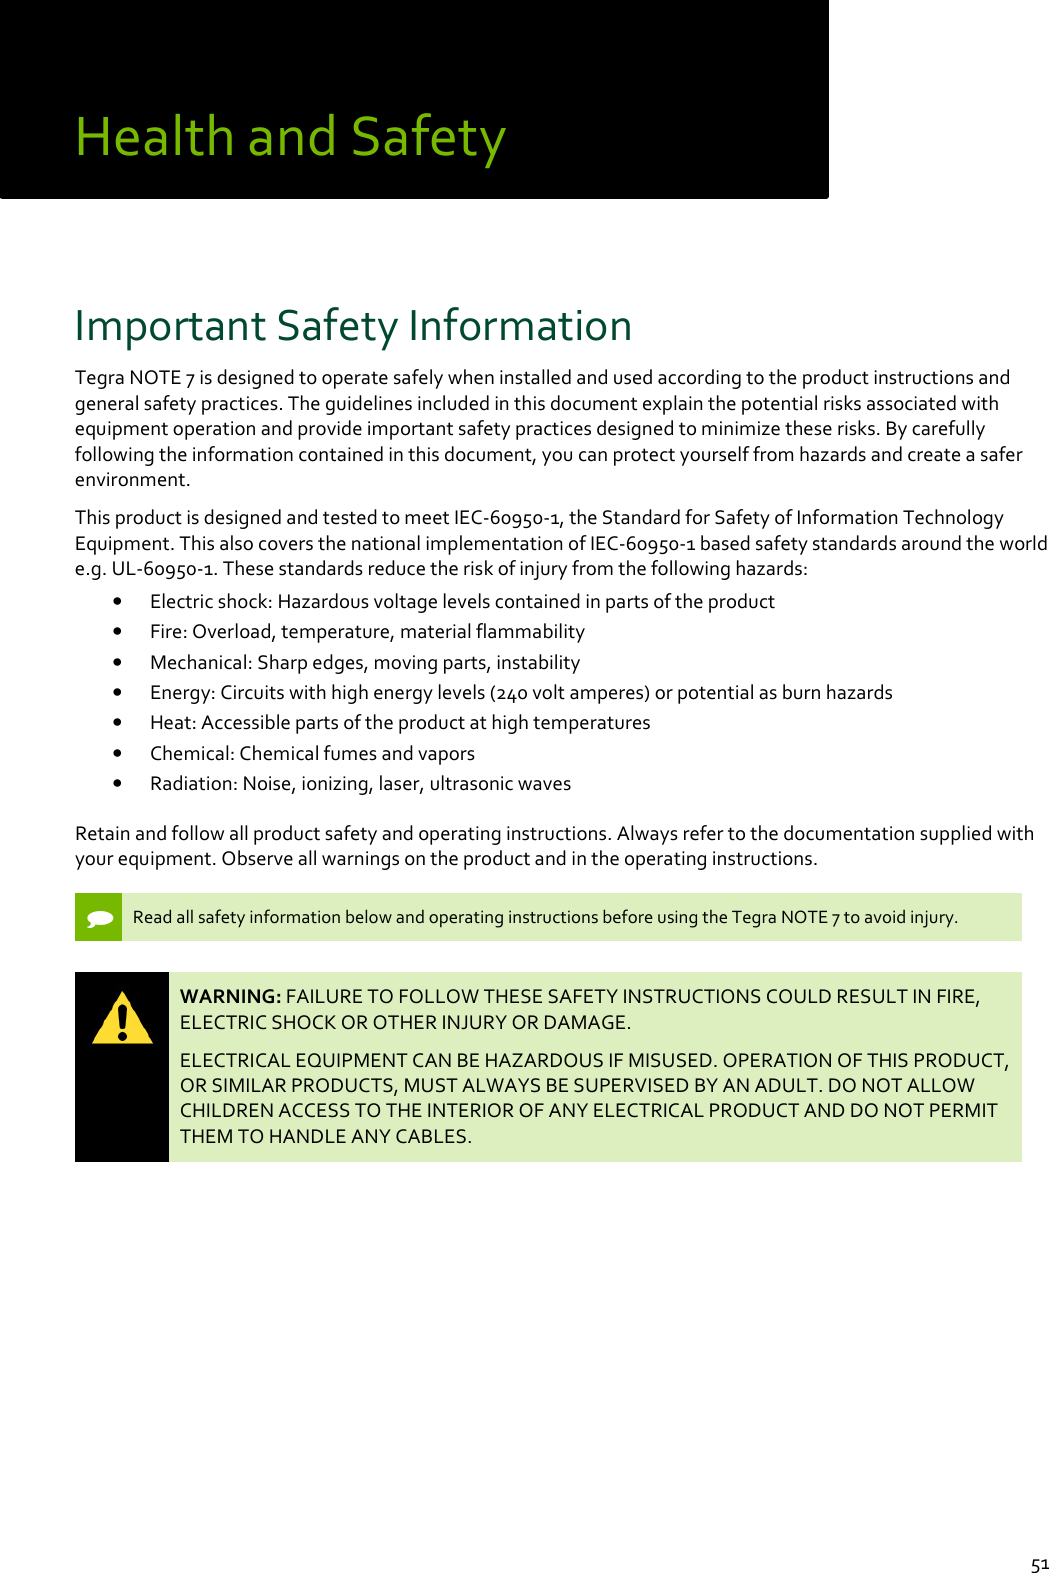  51 Health and Safety  Important Safety Information Tegra NOTE 7 is designed to operate safely when installed and used according to the product instructions and general safety practices. The guidelines included in this document explain the potential risks associated with equipment operation and provide important safety practices designed to minimize these risks. By carefully following the information contained in this document, you can protect yourself from hazards and create a safer environment.  This product is designed and tested to meet IEC-60950-1, the Standard for Safety of Information Technology Equipment. This also covers the national implementation of IEC-60950-1 based safety standards around the world e.g. UL-60950-1. These standards reduce the risk of injury from the following hazards: • Electric shock: Hazardous voltage levels contained in parts of the product • Fire: Overload, temperature, material flammability • Mechanical: Sharp edges, moving parts, instability • Energy: Circuits with high energy levels (240 volt amperes) or potential as burn hazards • Heat: Accessible parts of the product at high temperatures • Chemical: Chemical fumes and vapors • Radiation: Noise, ionizing, laser, ultrasonic waves Retain and follow all product safety and operating instructions. Always refer to the documentation supplied with your equipment. Observe all warnings on the product and in the operating instructions.    Read all safety information below and operating instructions before using the Tegra NOTE 7 to avoid injury.    WARNING: FAILURE TO FOLLOW THESE SAFETY INSTRUCTIONS COULD RESULT IN FIRE, ELECTRIC SHOCK OR OTHER INJURY OR DAMAGE.  ELECTRICAL EQUIPMENT CAN BE HAZARDOUS IF MISUSED. OPERATION OF THIS PRODUCT, OR SIMILAR PRODUCTS, MUST ALWAYS BE SUPERVISED BY AN ADULT. DO NOT ALLOW CHILDREN ACCESS TO THE INTERIOR OF ANY ELECTRICAL PRODUCT AND DO NOT PERMIT THEM TO HANDLE ANY CABLES.     